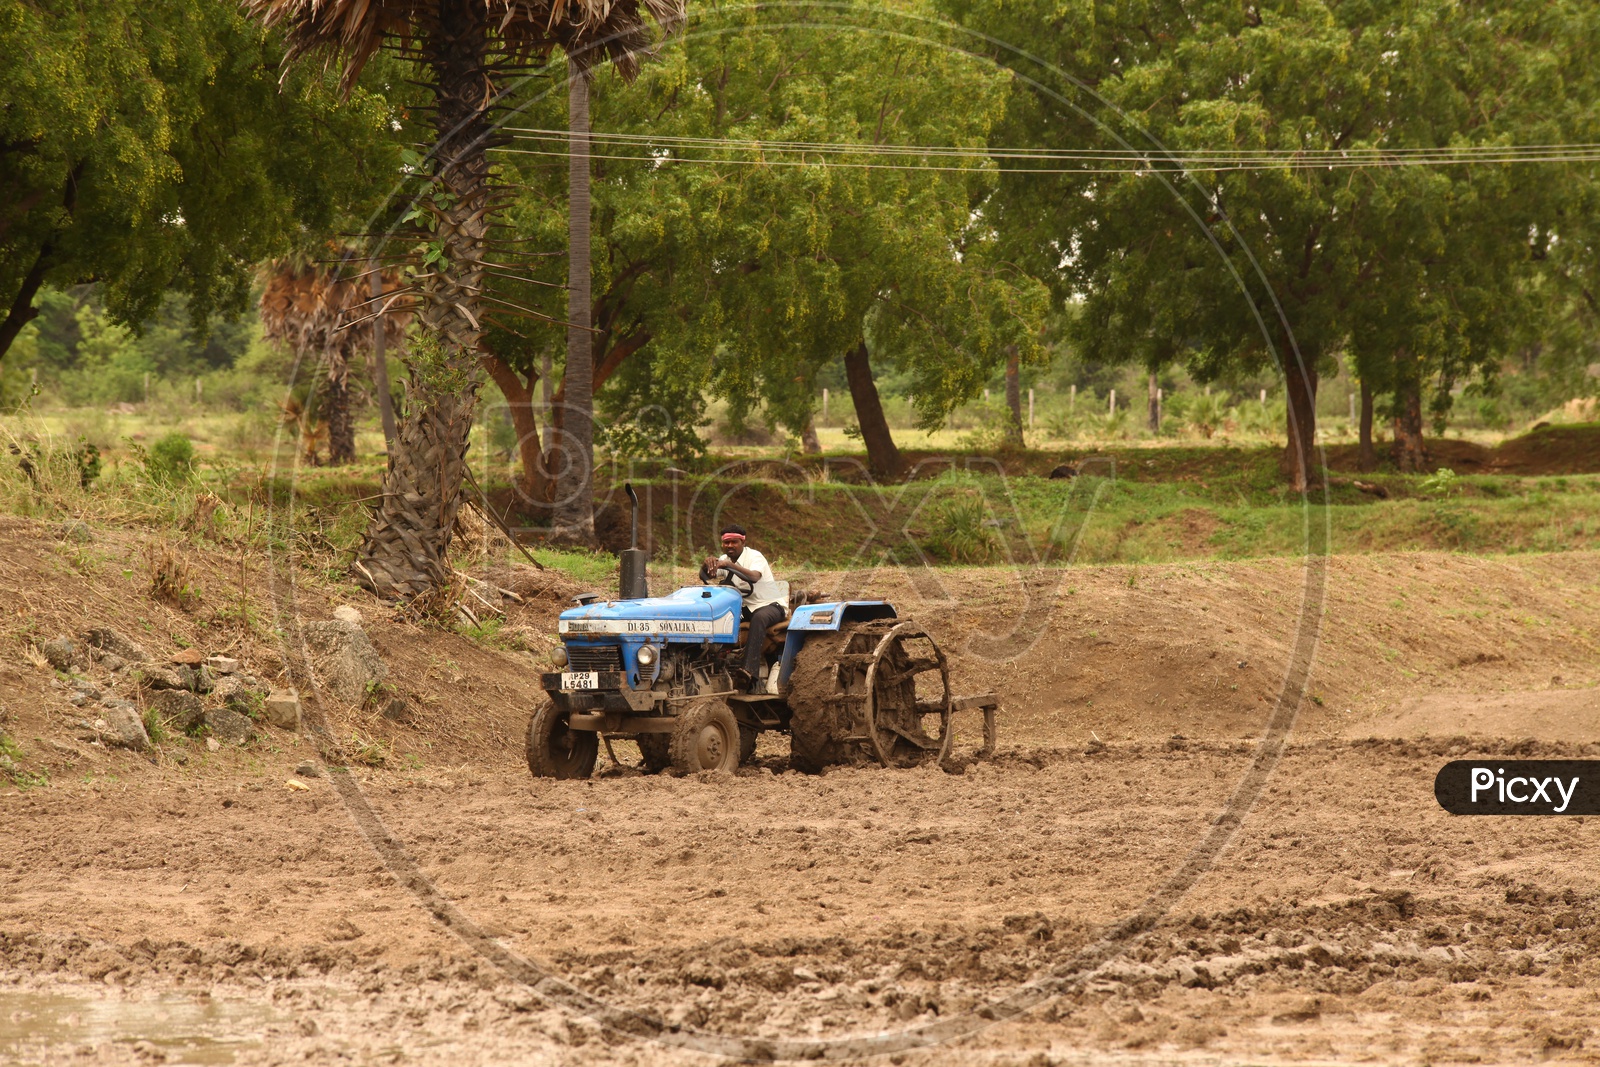 Indian Man With Tractor in an Agricultural Field